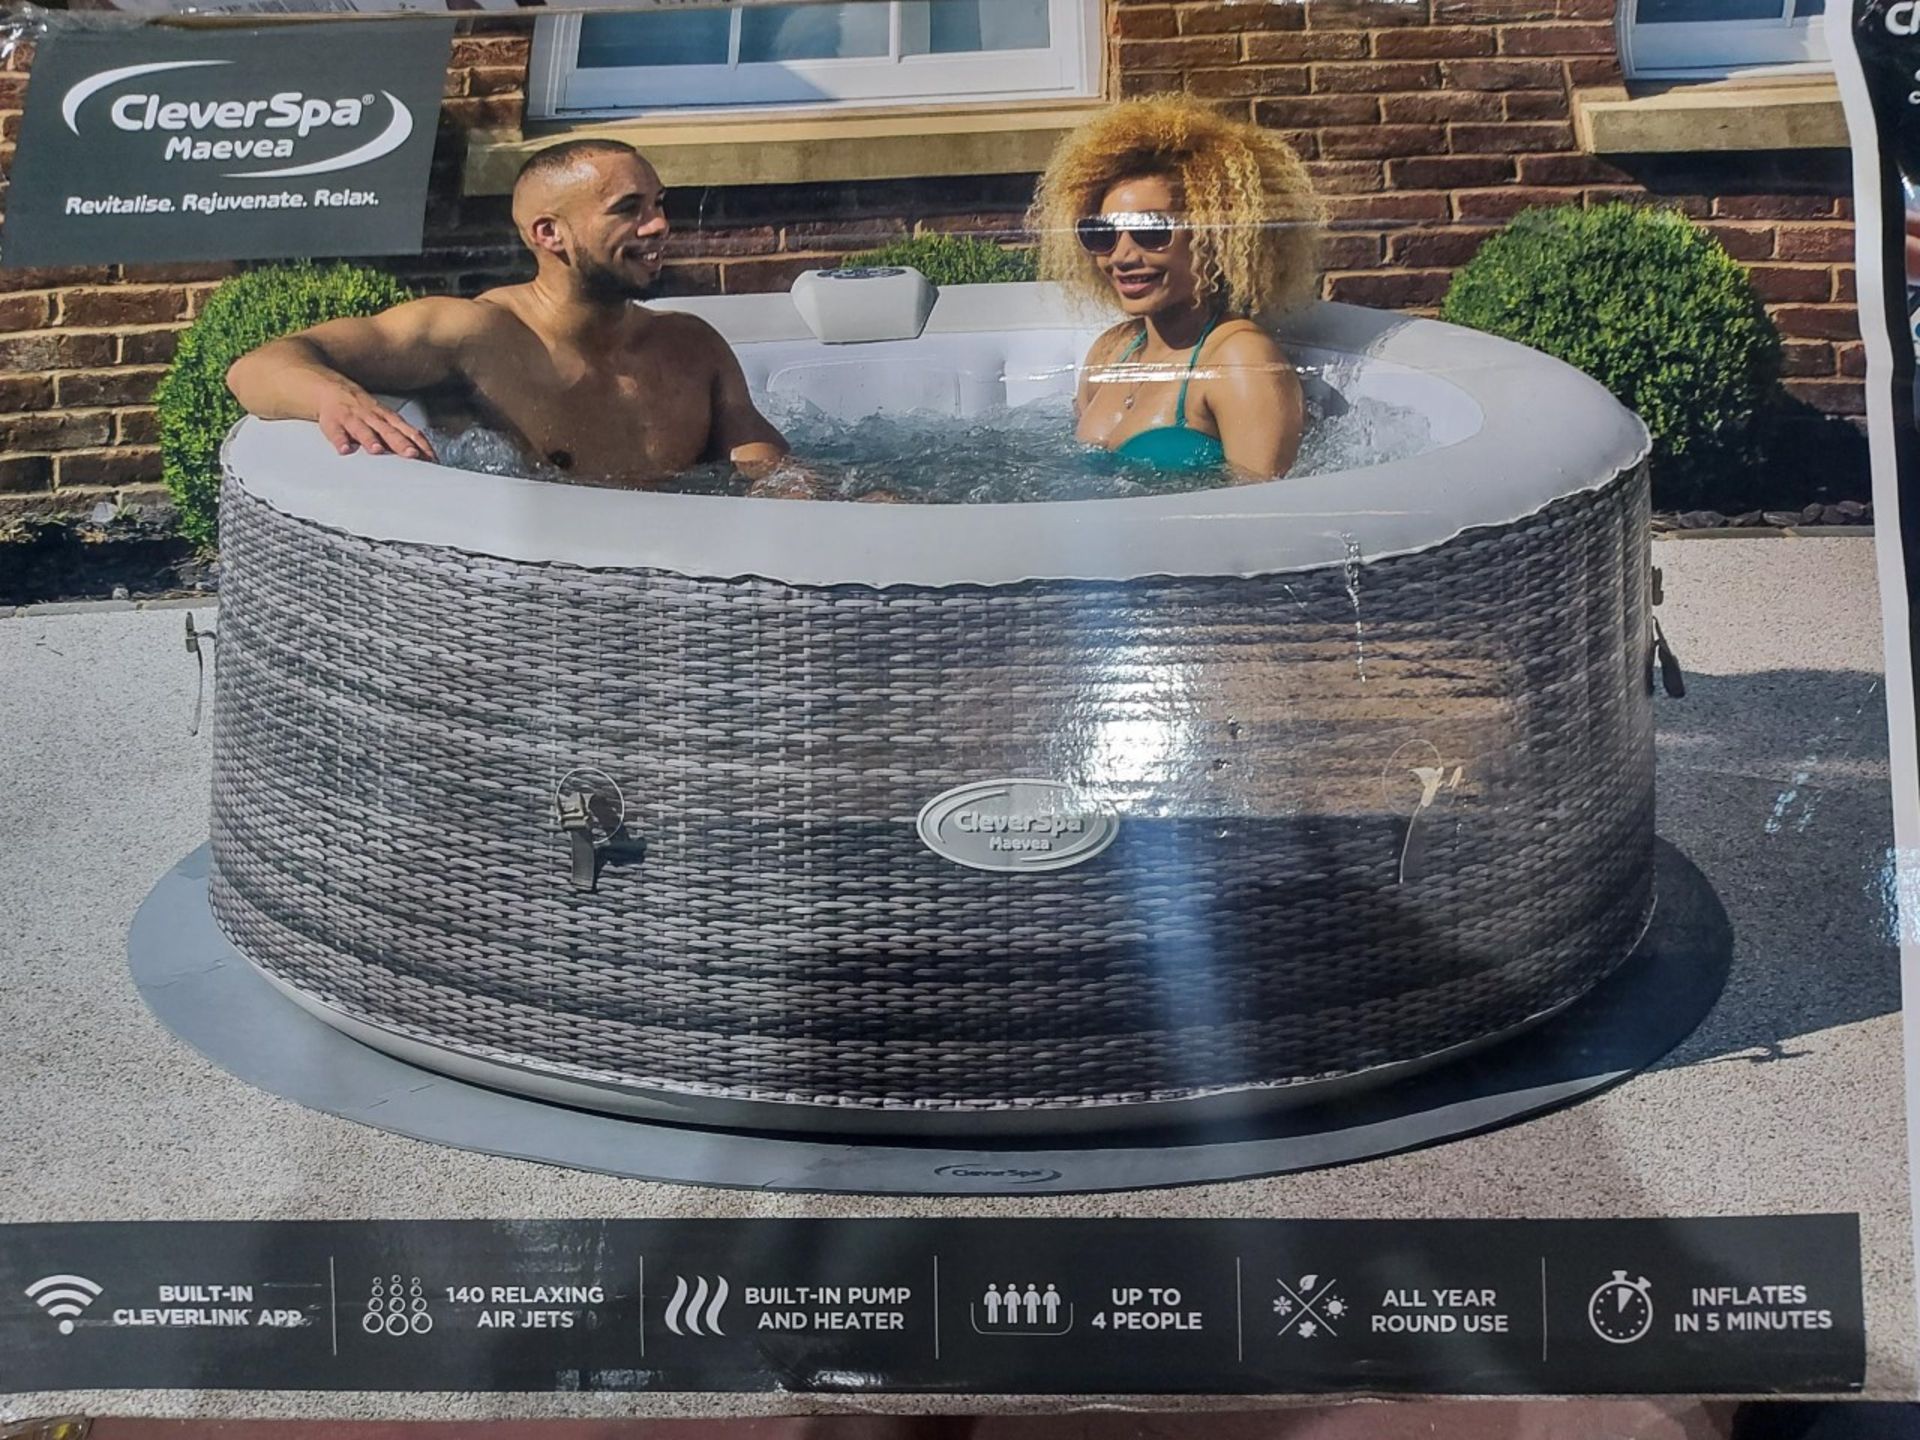 BOXED CleverSpa Maevea 4 person Hot Tub. RRP £488. UNCHECKED/UNTESTED